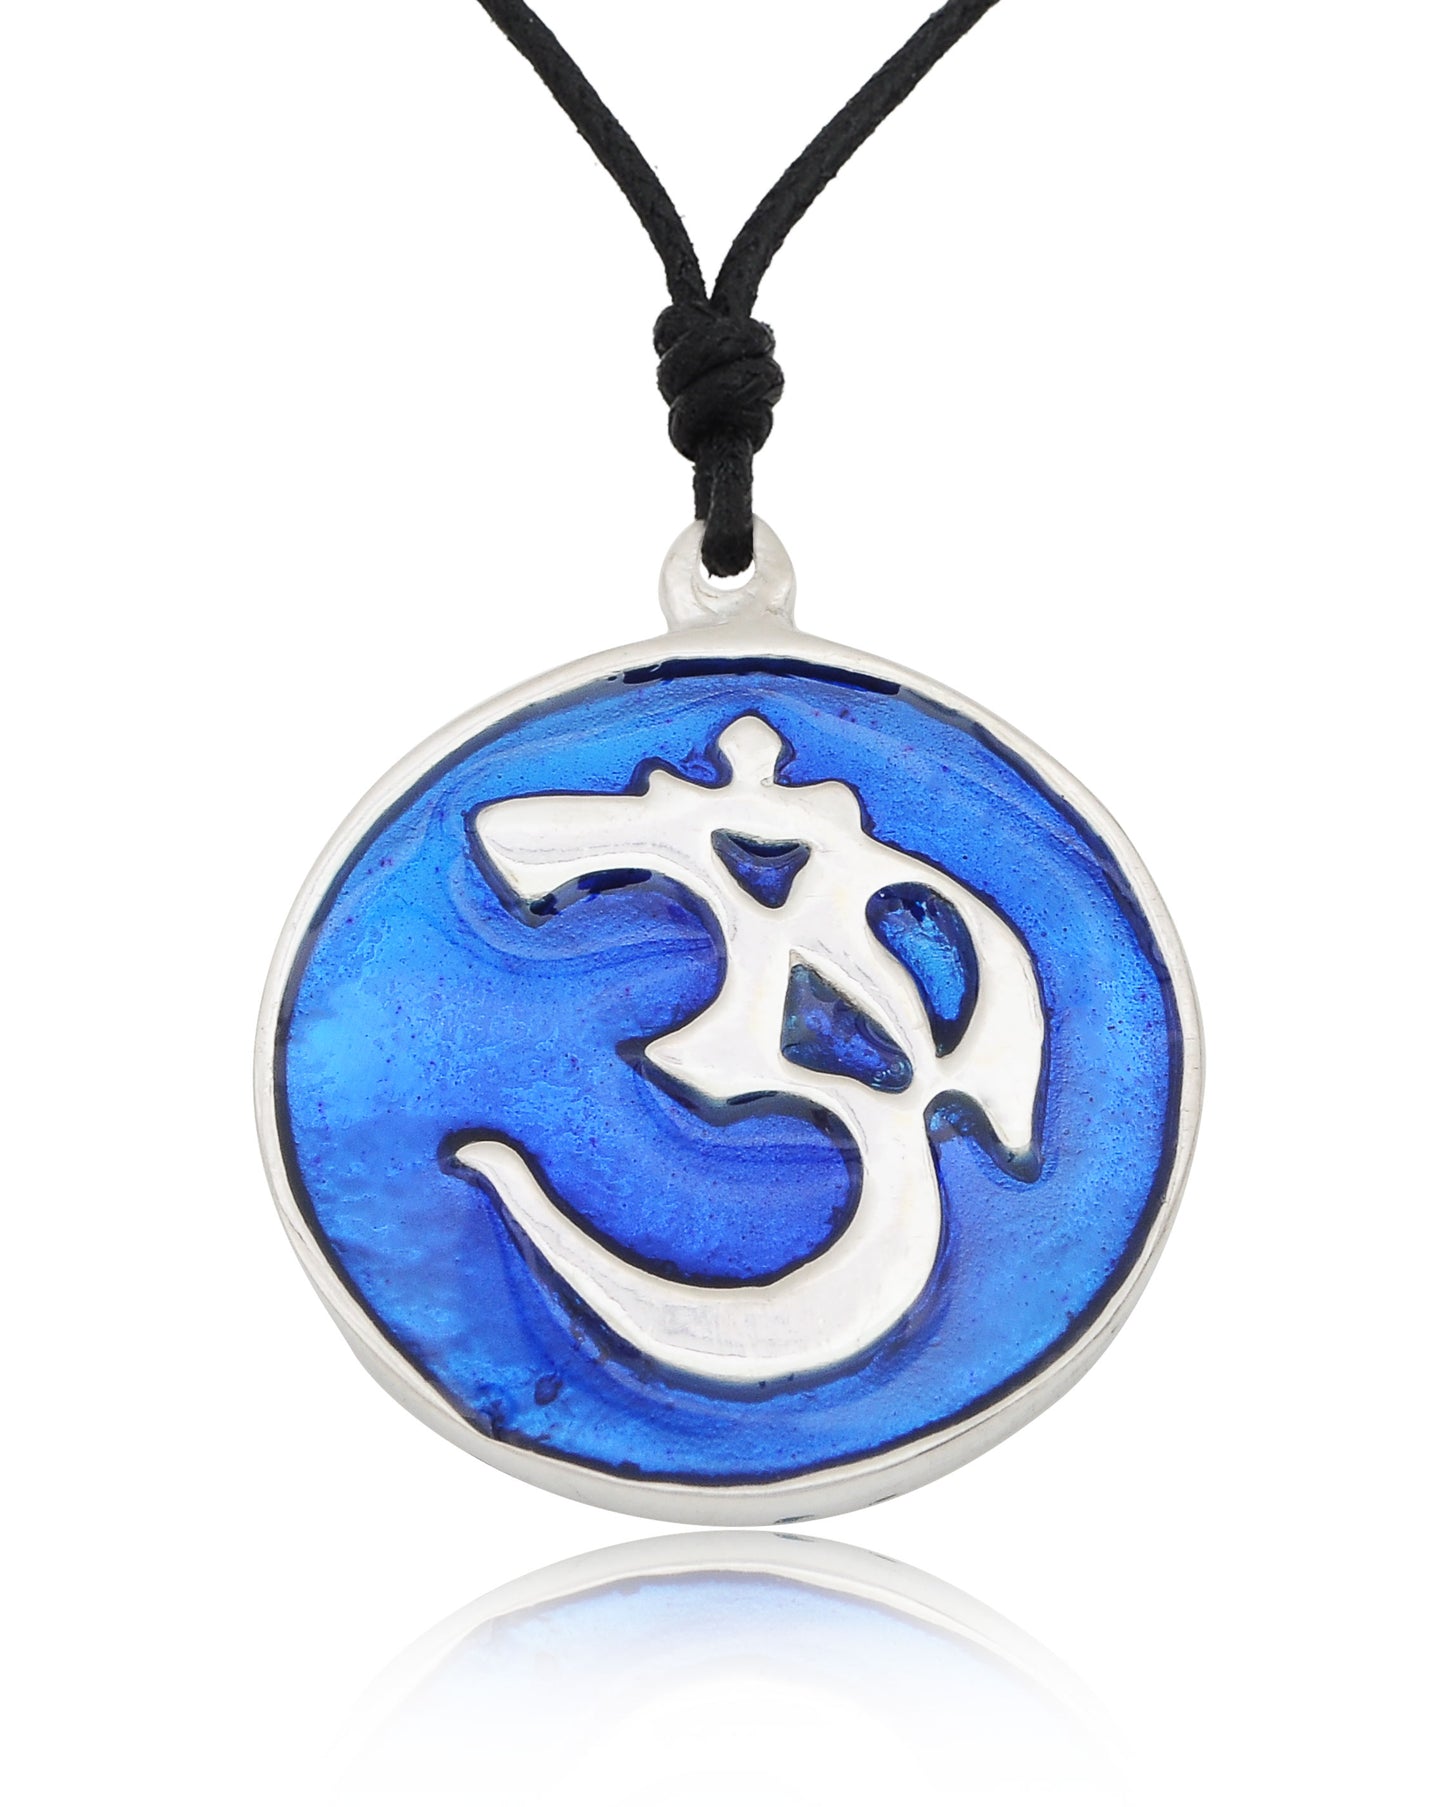 Trendy Hindu Symbol Silver Pewter Charm Necklace Pendant Jewelry